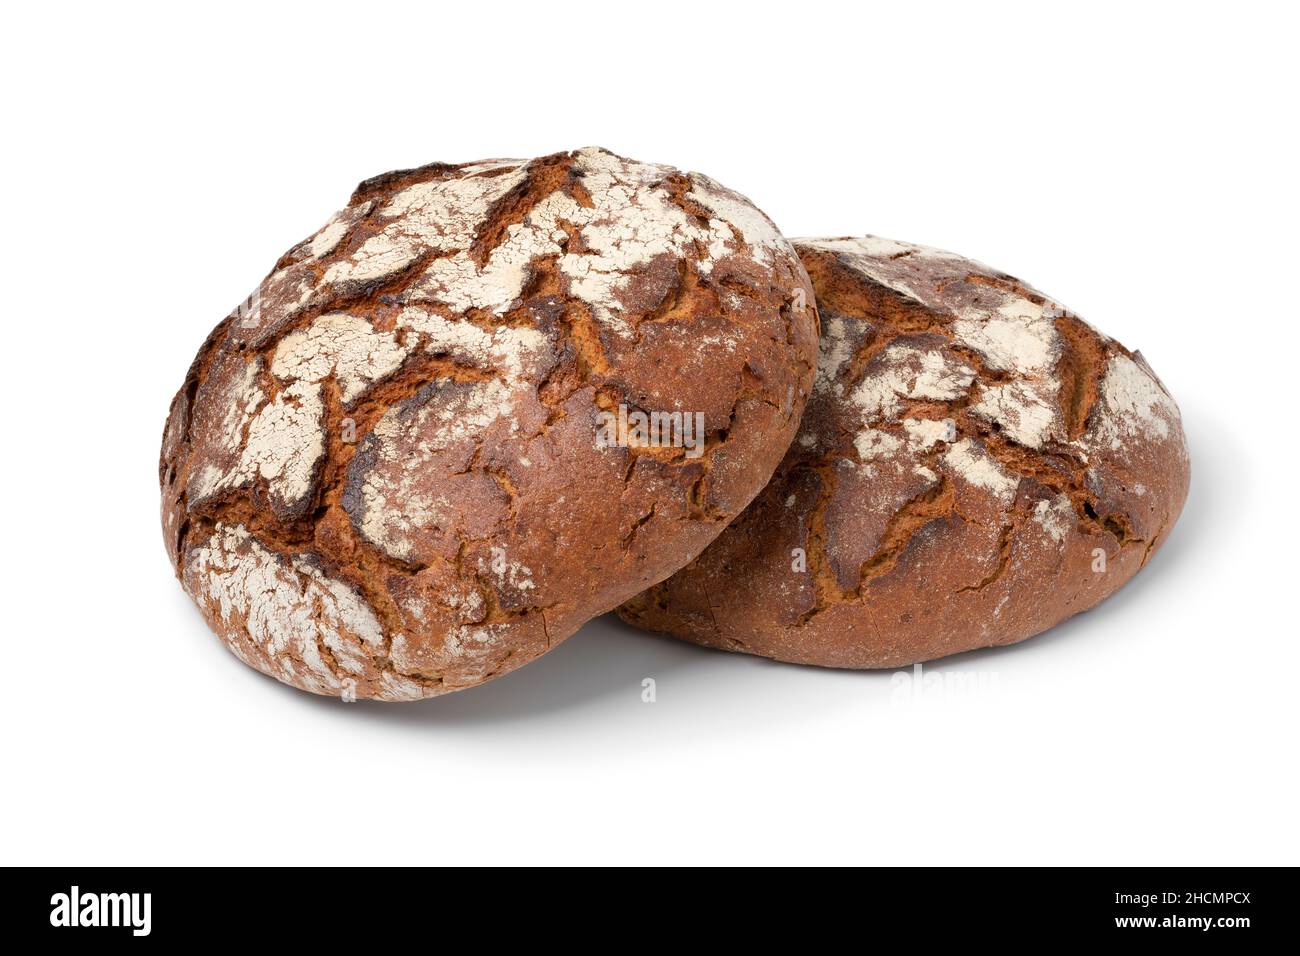 Pair of fresh baked German sourdough loaf of bread with rye and wheat flours isolated on white background Stock Photo